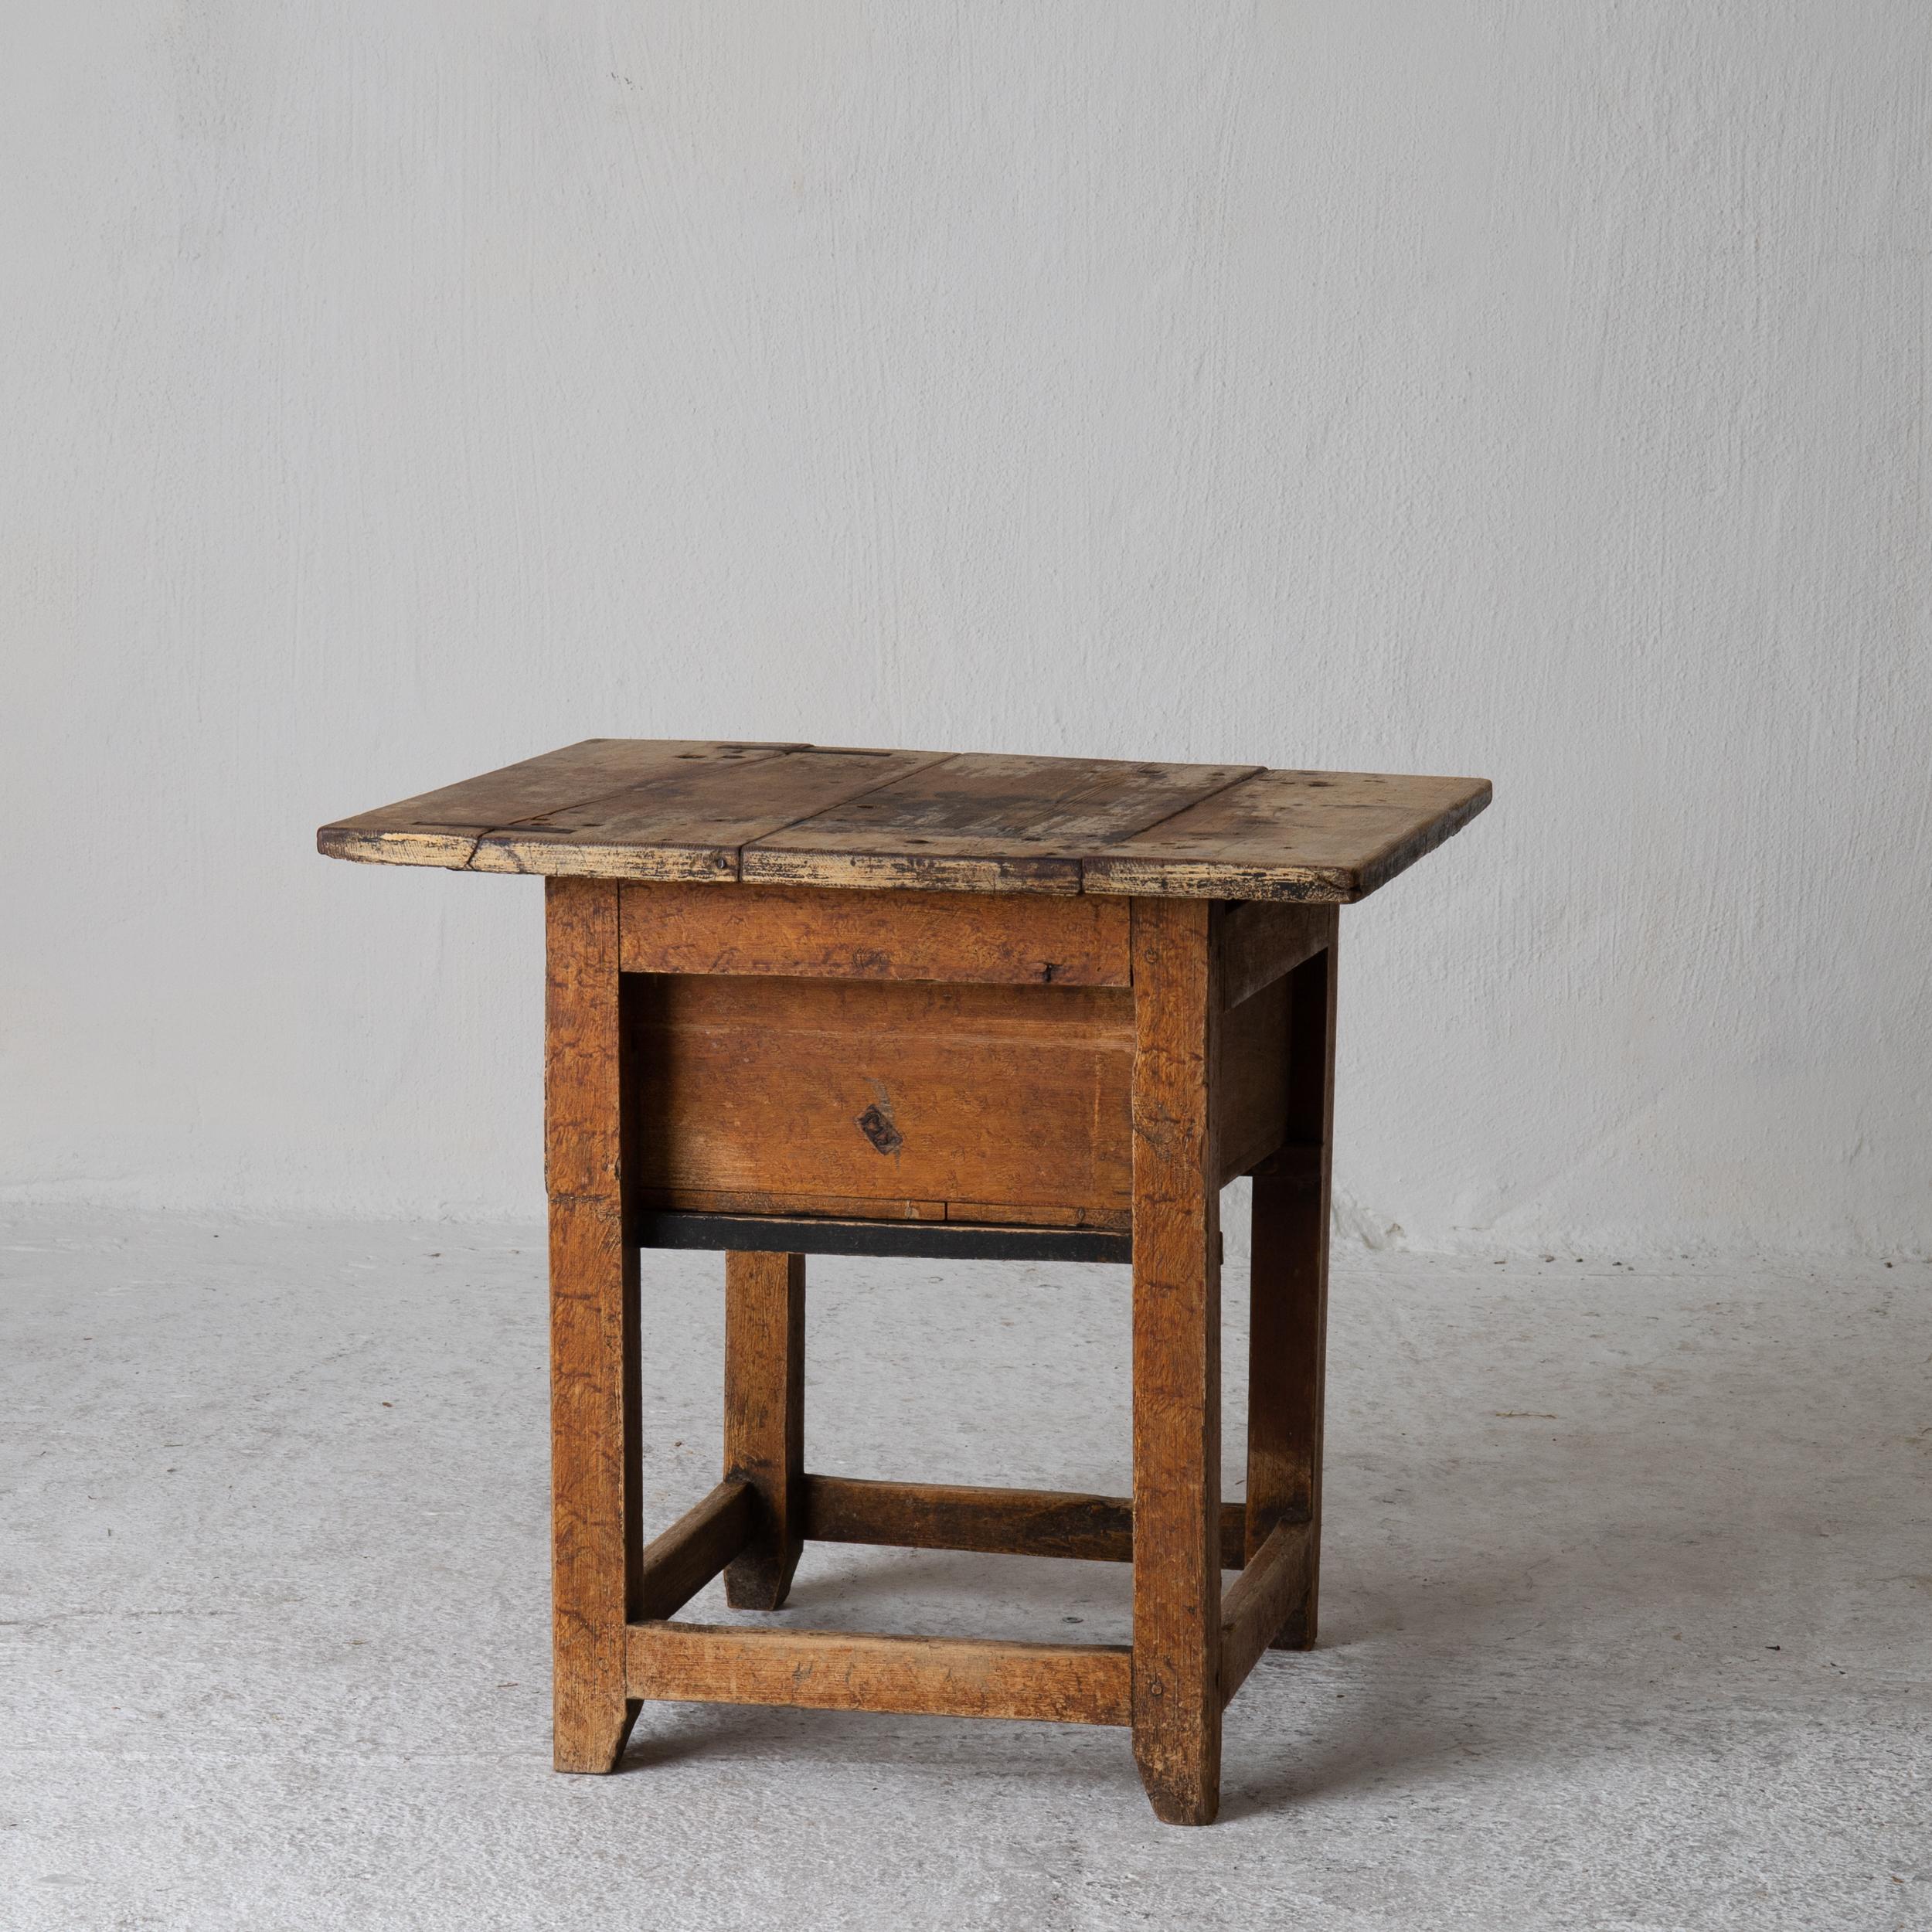 Table side table Swedish 19th century yellow drawer Sweden. A side table made during the 19th century in Sweden. Yellow paint in a rustic look with a beautiful patina. Drawer in frieze. Original hardware.